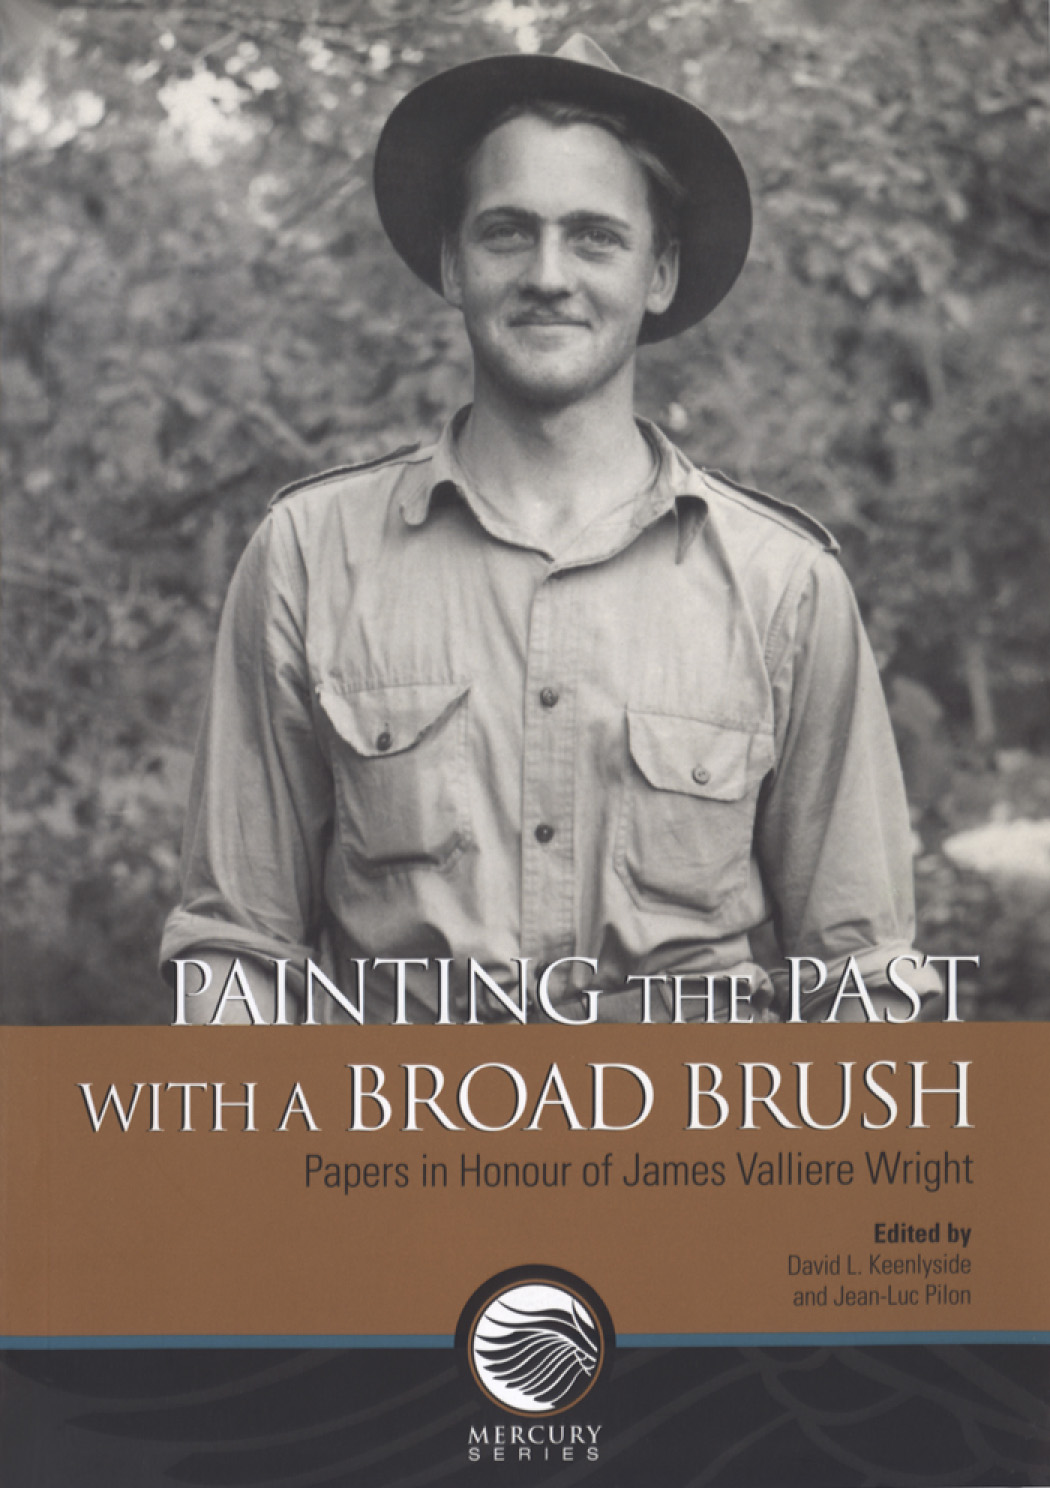 Painting the Past with a Broad Brush - David L. Keenlyside, Jean-Luc Pilon